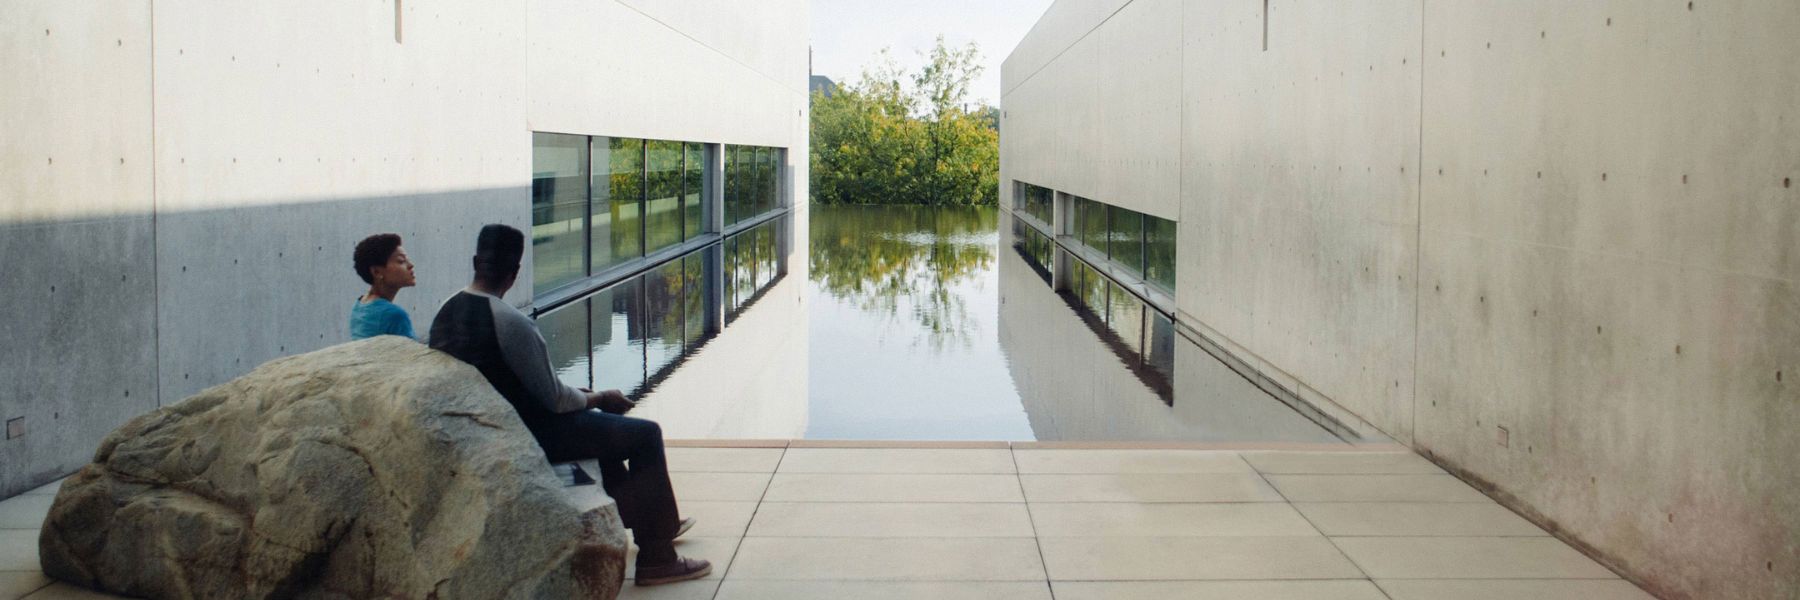 A couple overlooks the reflecting pool at the Pulitzer Arts Foundation.